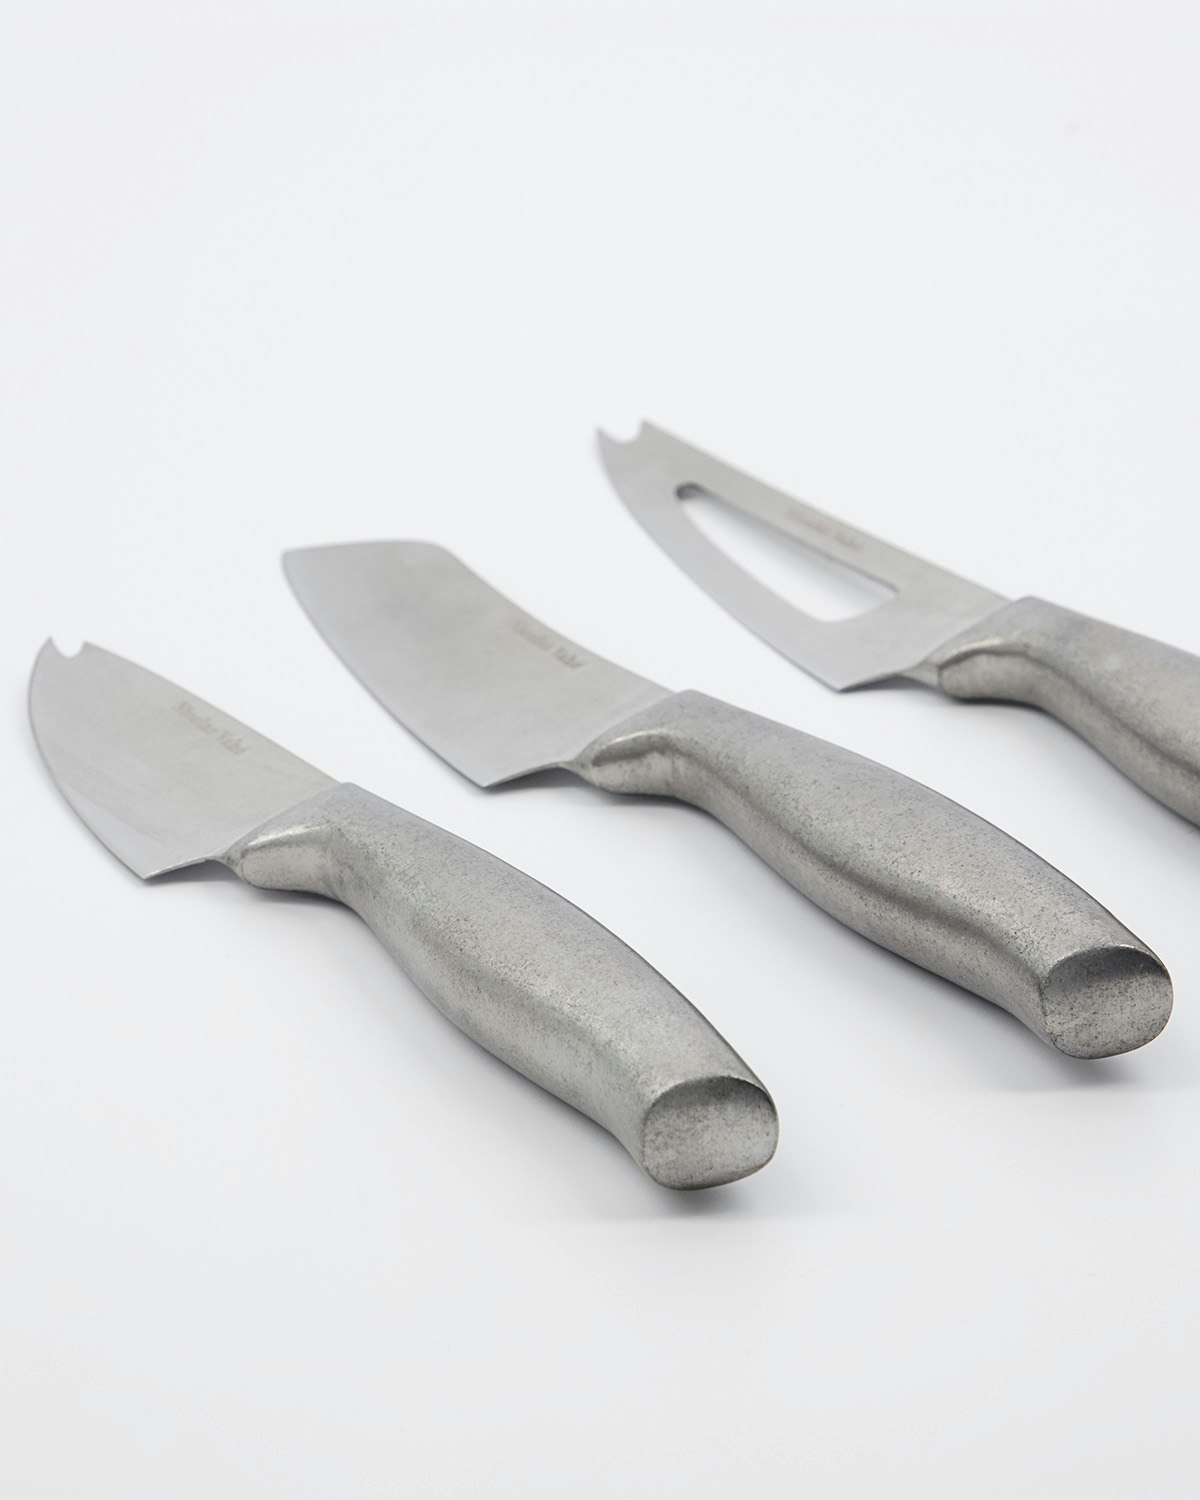 https://royaldesign.com/image/2/nicolas-vahe-fromage-cheese-knives-3-parts-1?w=800&quality=80